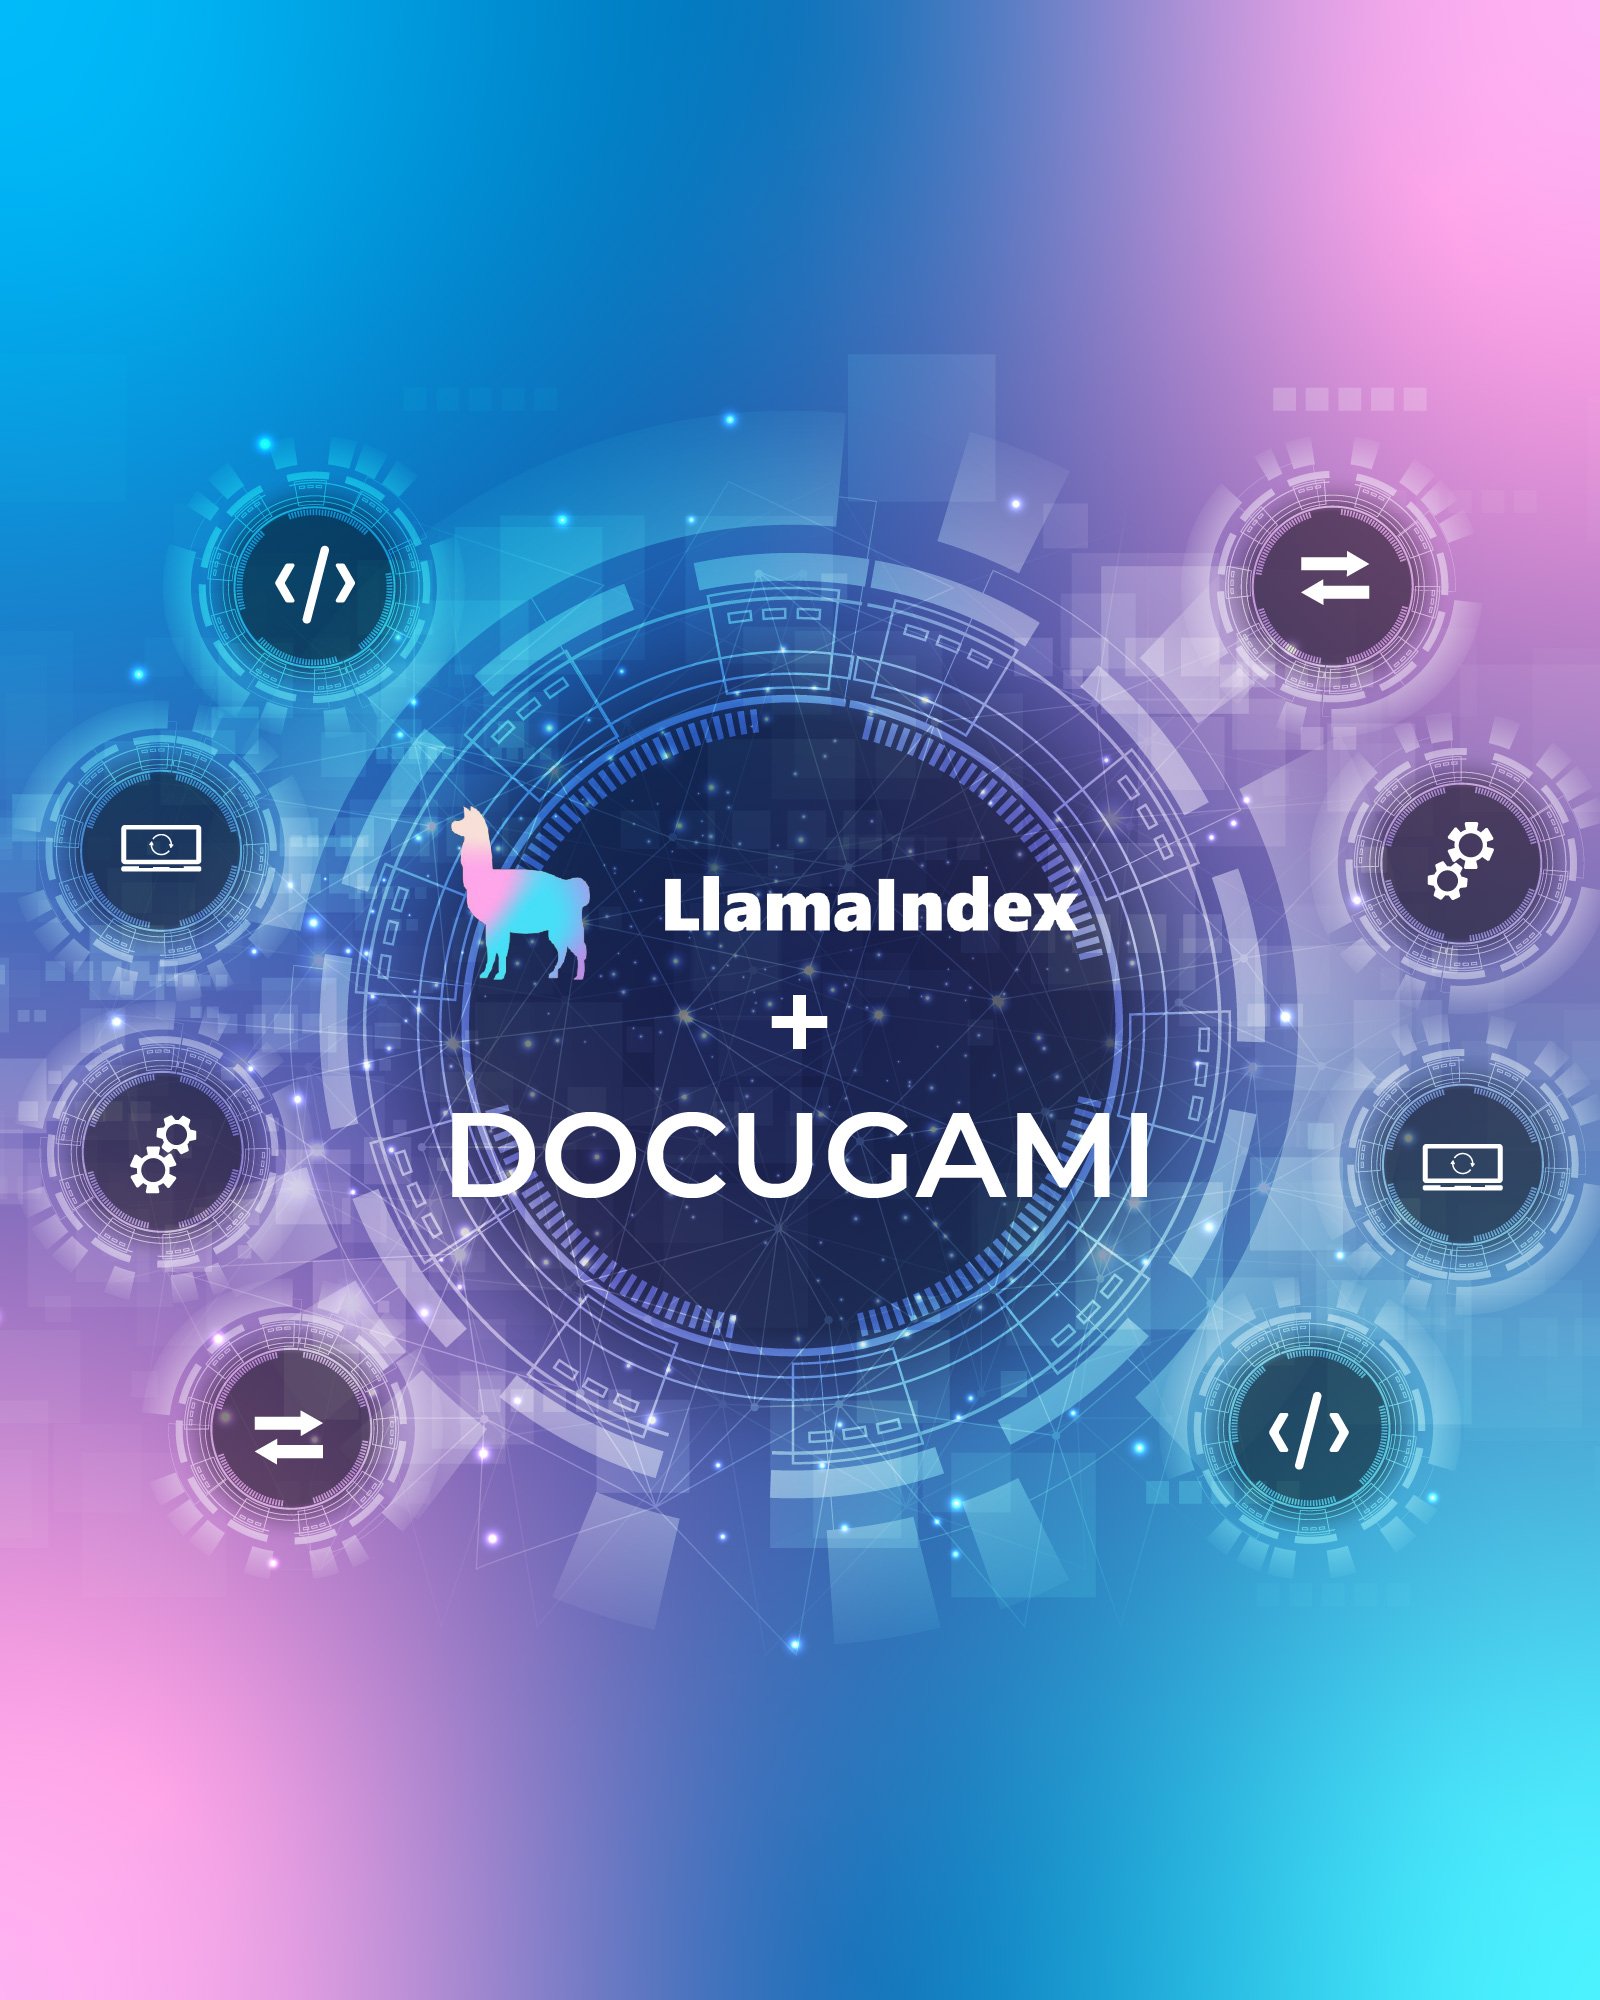 An image showing the LlamaIndex logo and name and the Docugami name superimposed over images of connected technology and icons of technology tools and processes